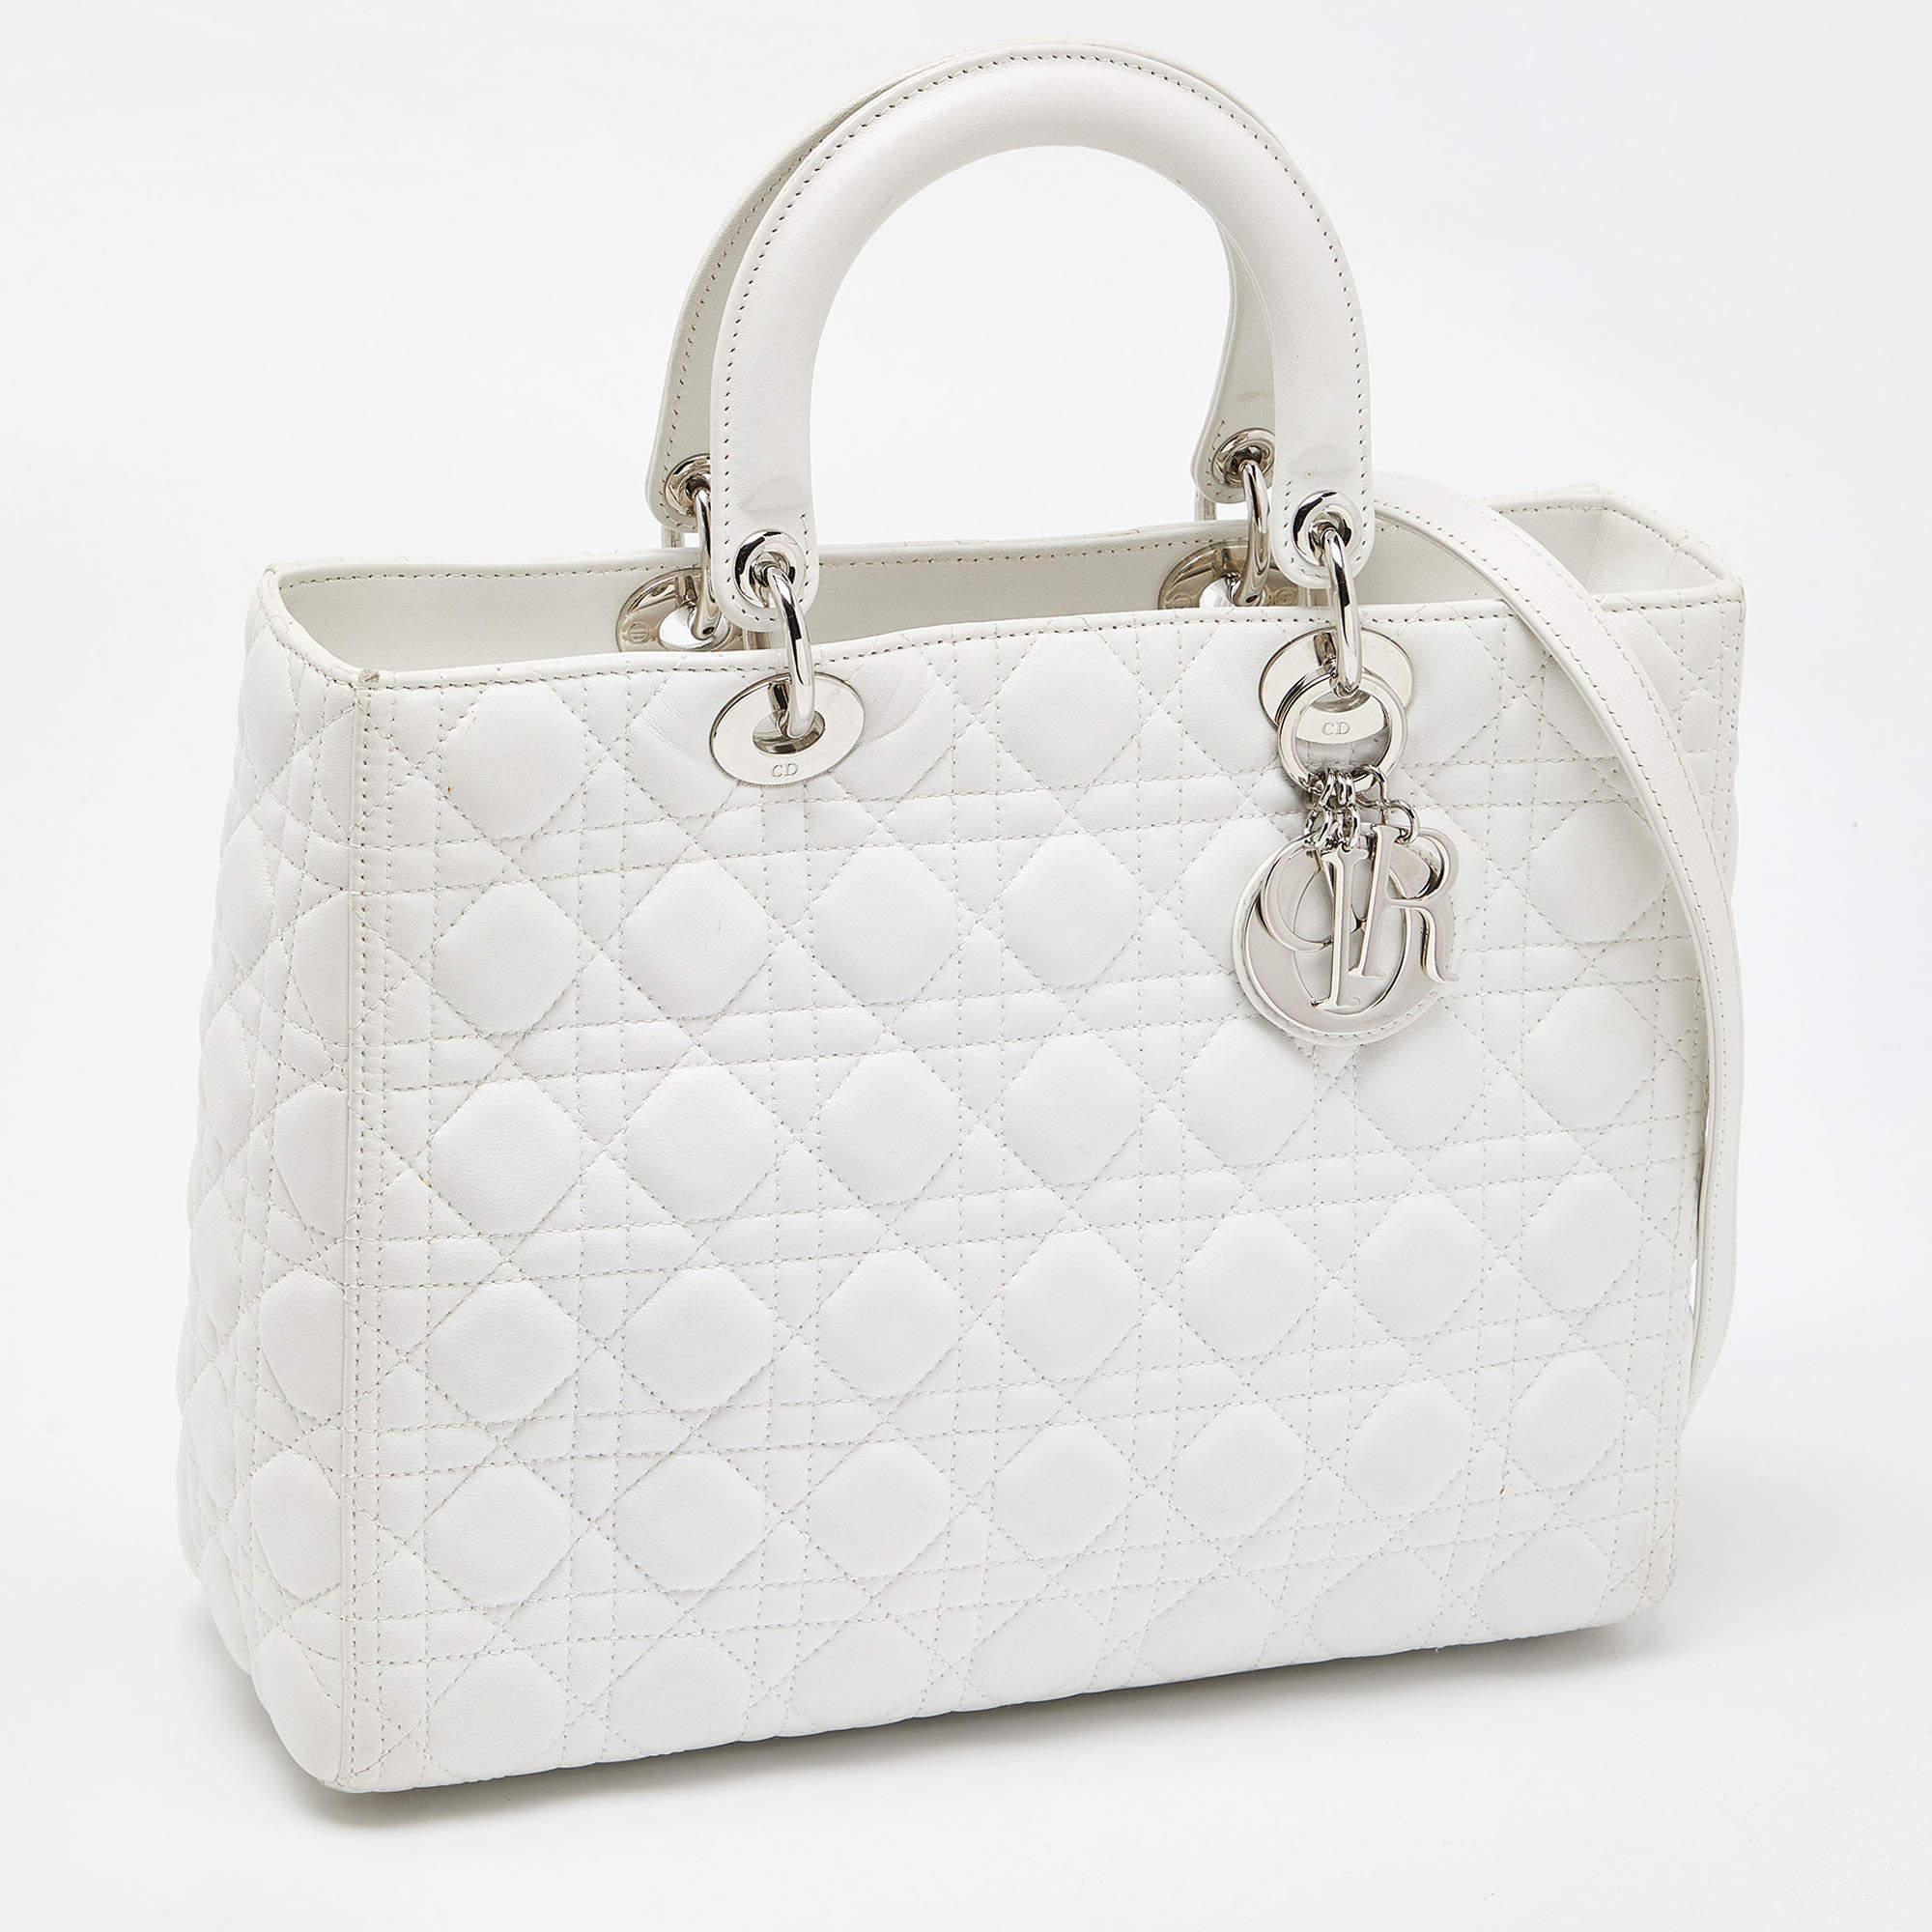 Dior White Cannage Leather Large Lady Dior Tote In Good Condition For Sale In Dubai, Al Qouz 2